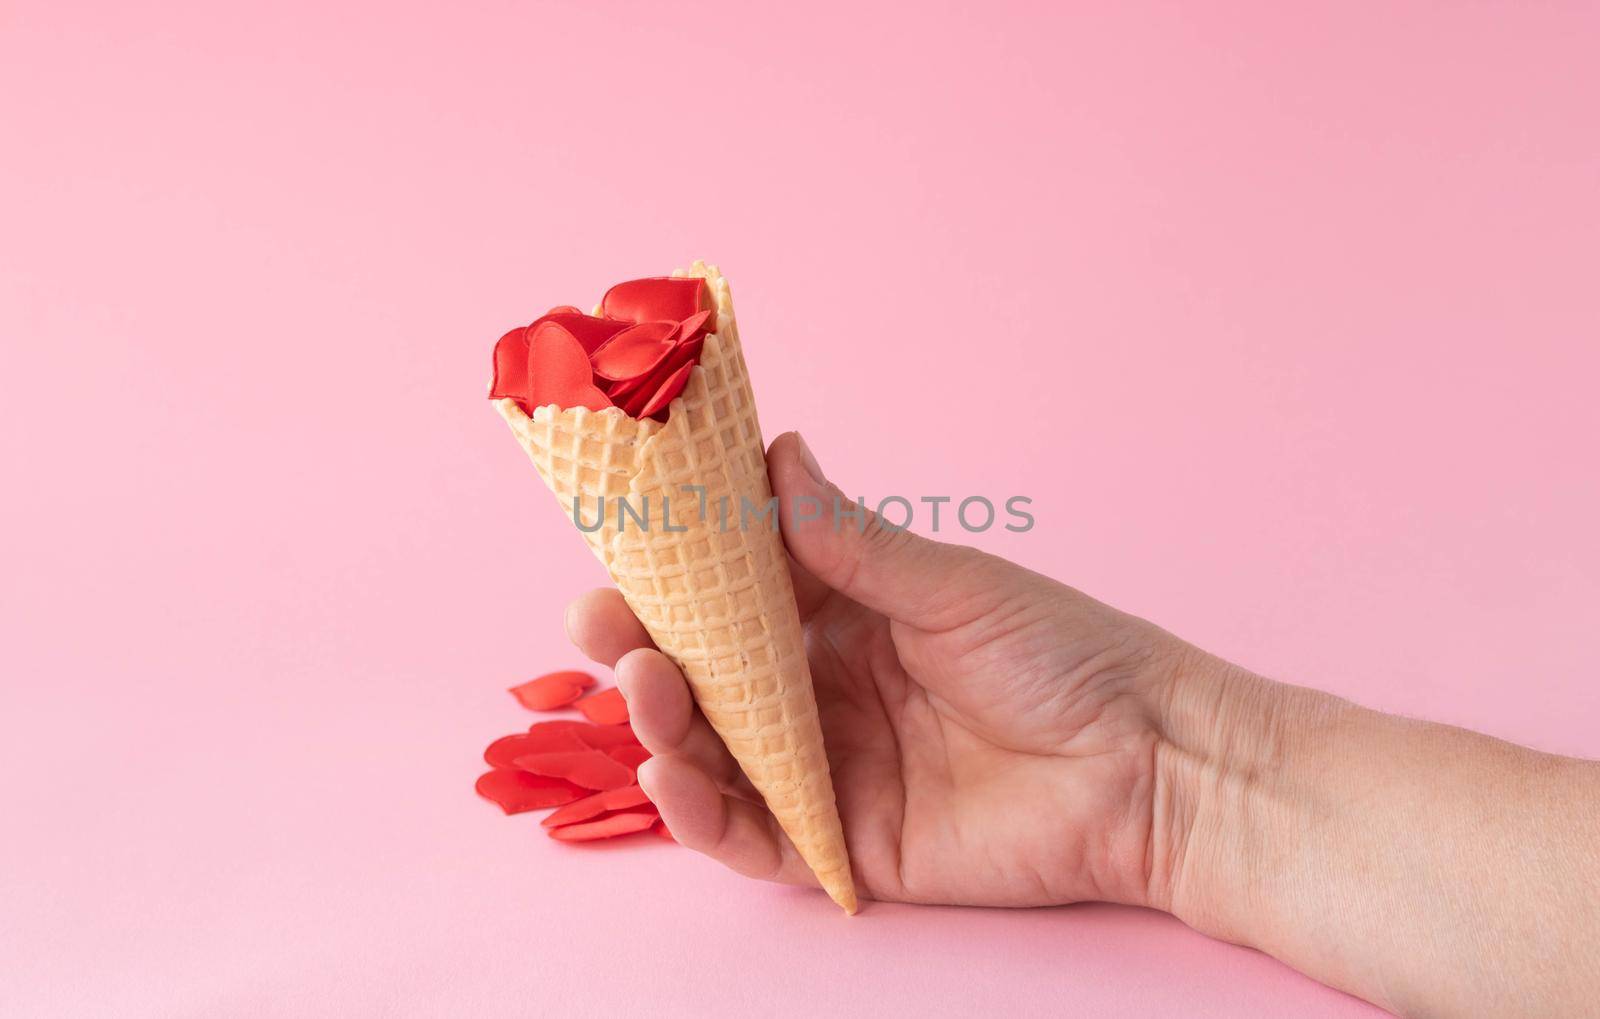 The hand holds an ice cream cone with red hearts. Creative photo of empty waffle cones with scattered red hearts on a pink background. The concept of love, summer, spring.